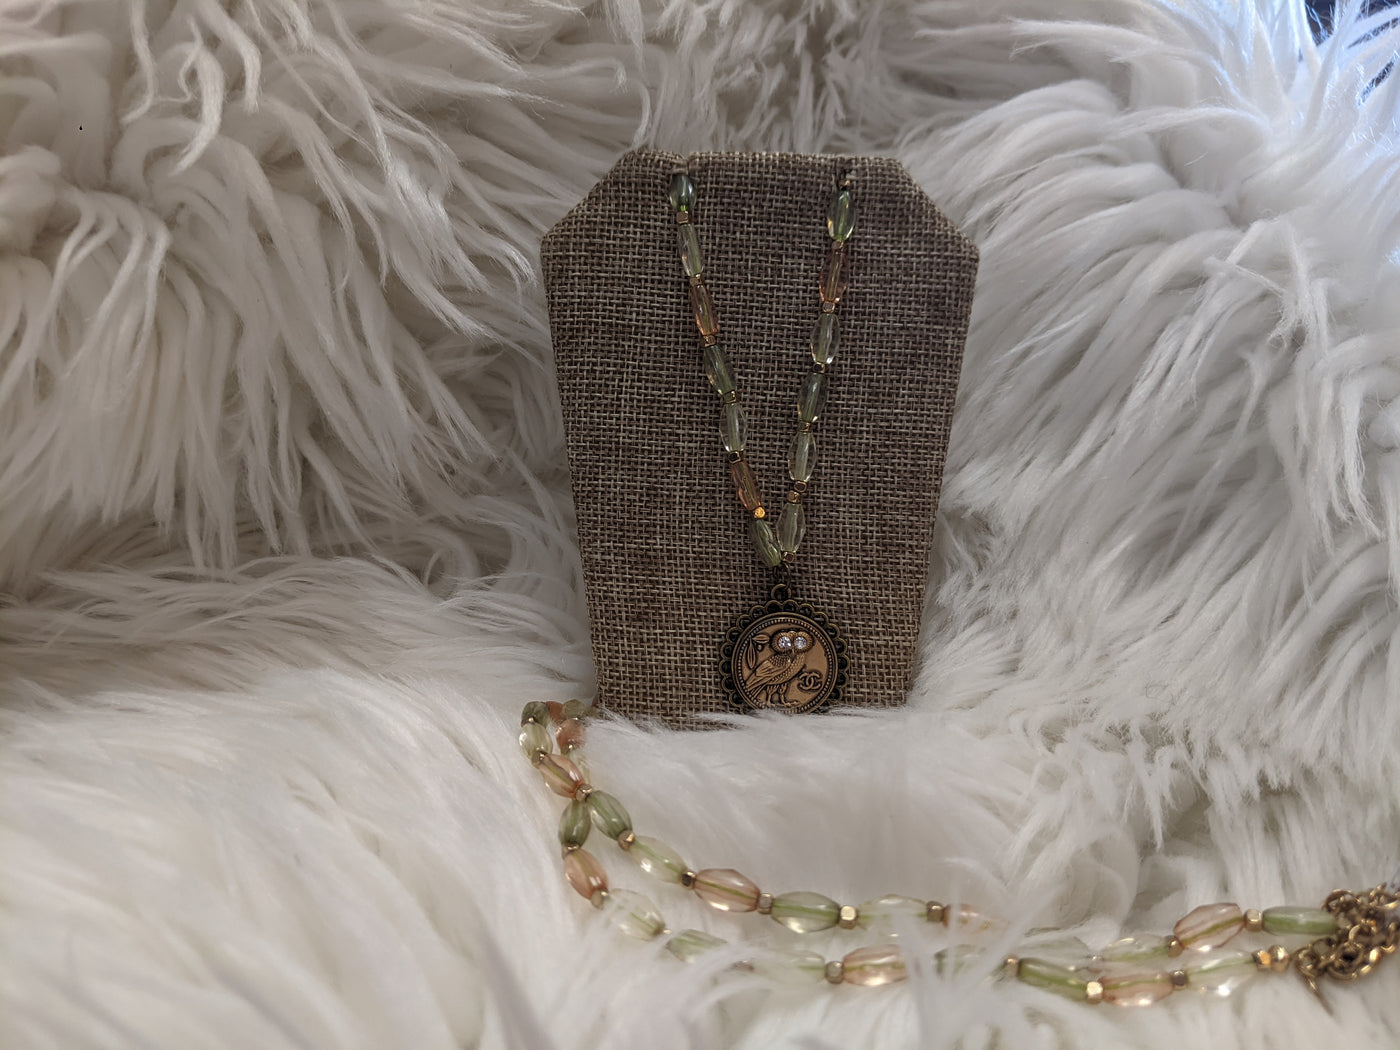 TS123 - Chanel Owl on Vintage Monet Beads